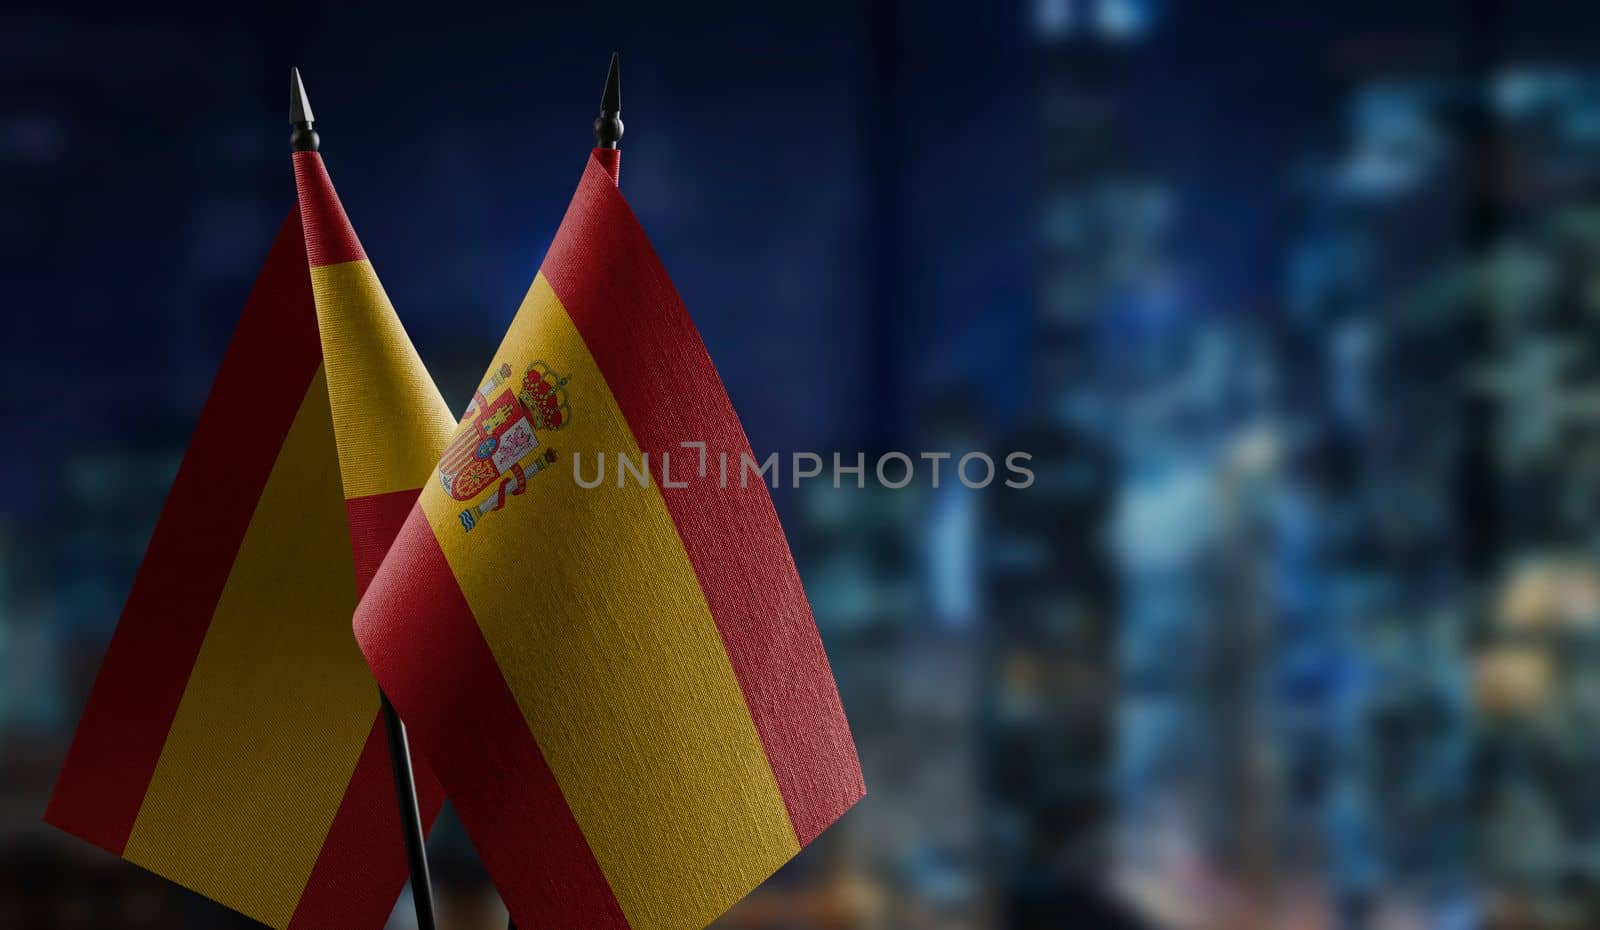 A small Spain flag on an abstract blurry background by butenkow